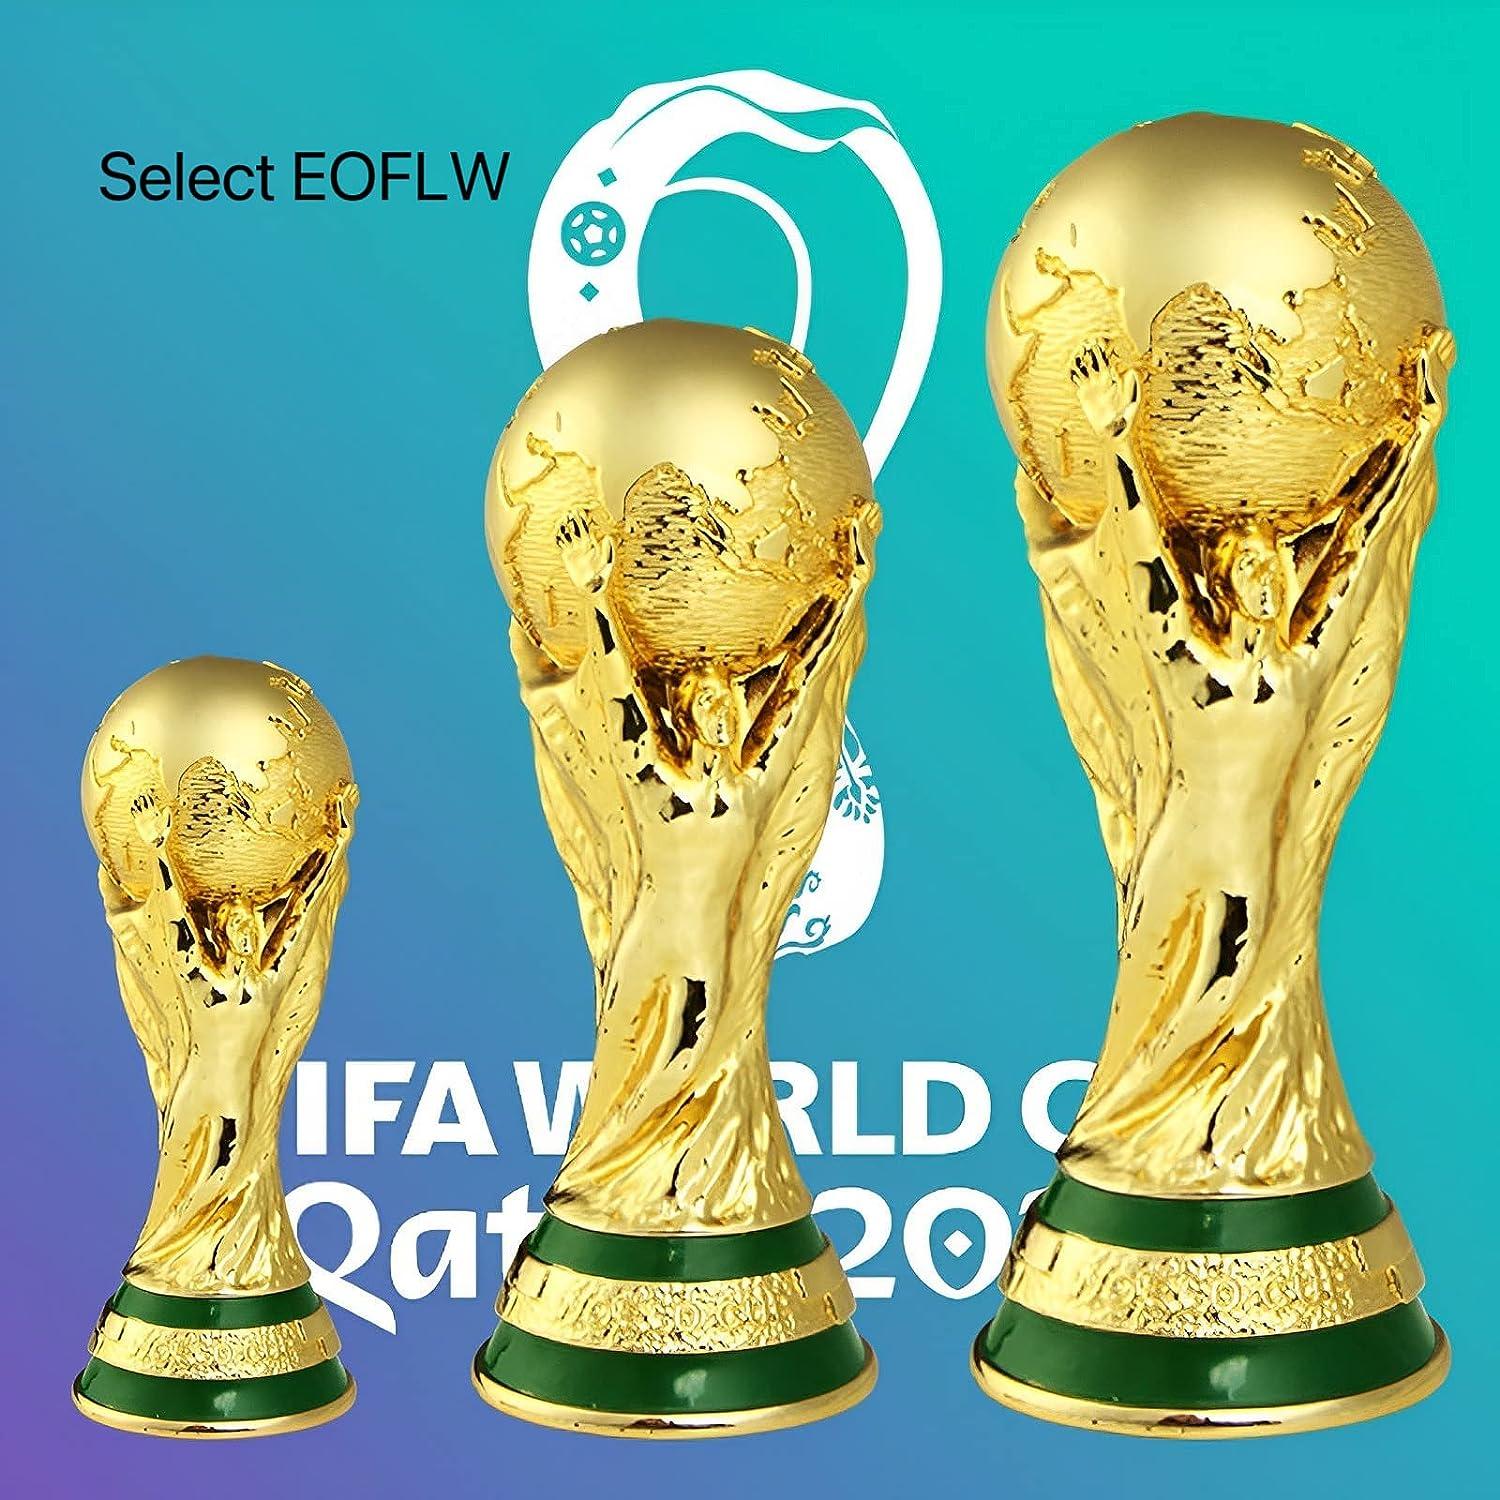  World Cup Trophy Replica, 2022 World Cup Replica, Resin Soccer  Collectibles, Sports Fan Trophy, Gold World Cup Trophy for Bedroom Office  Desktop Decor (5.1 Inches) : Sports & Outdoors